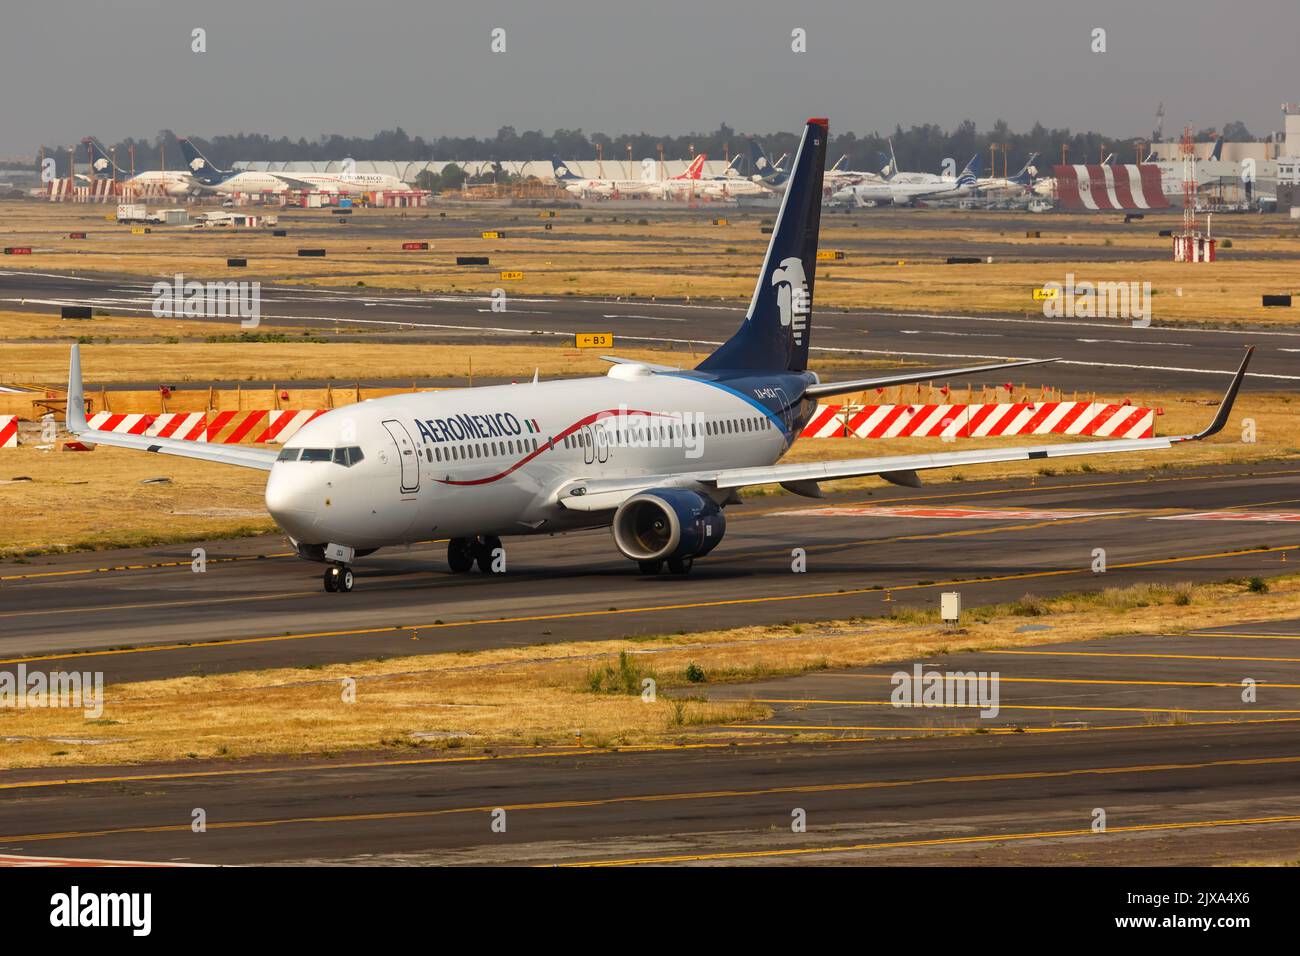 Mexico City, Mexico - April 14, 2022: AeroMexico Boeing 737-800 airplane at Mexico City airport (MEX) in Mexico. Stock Photo